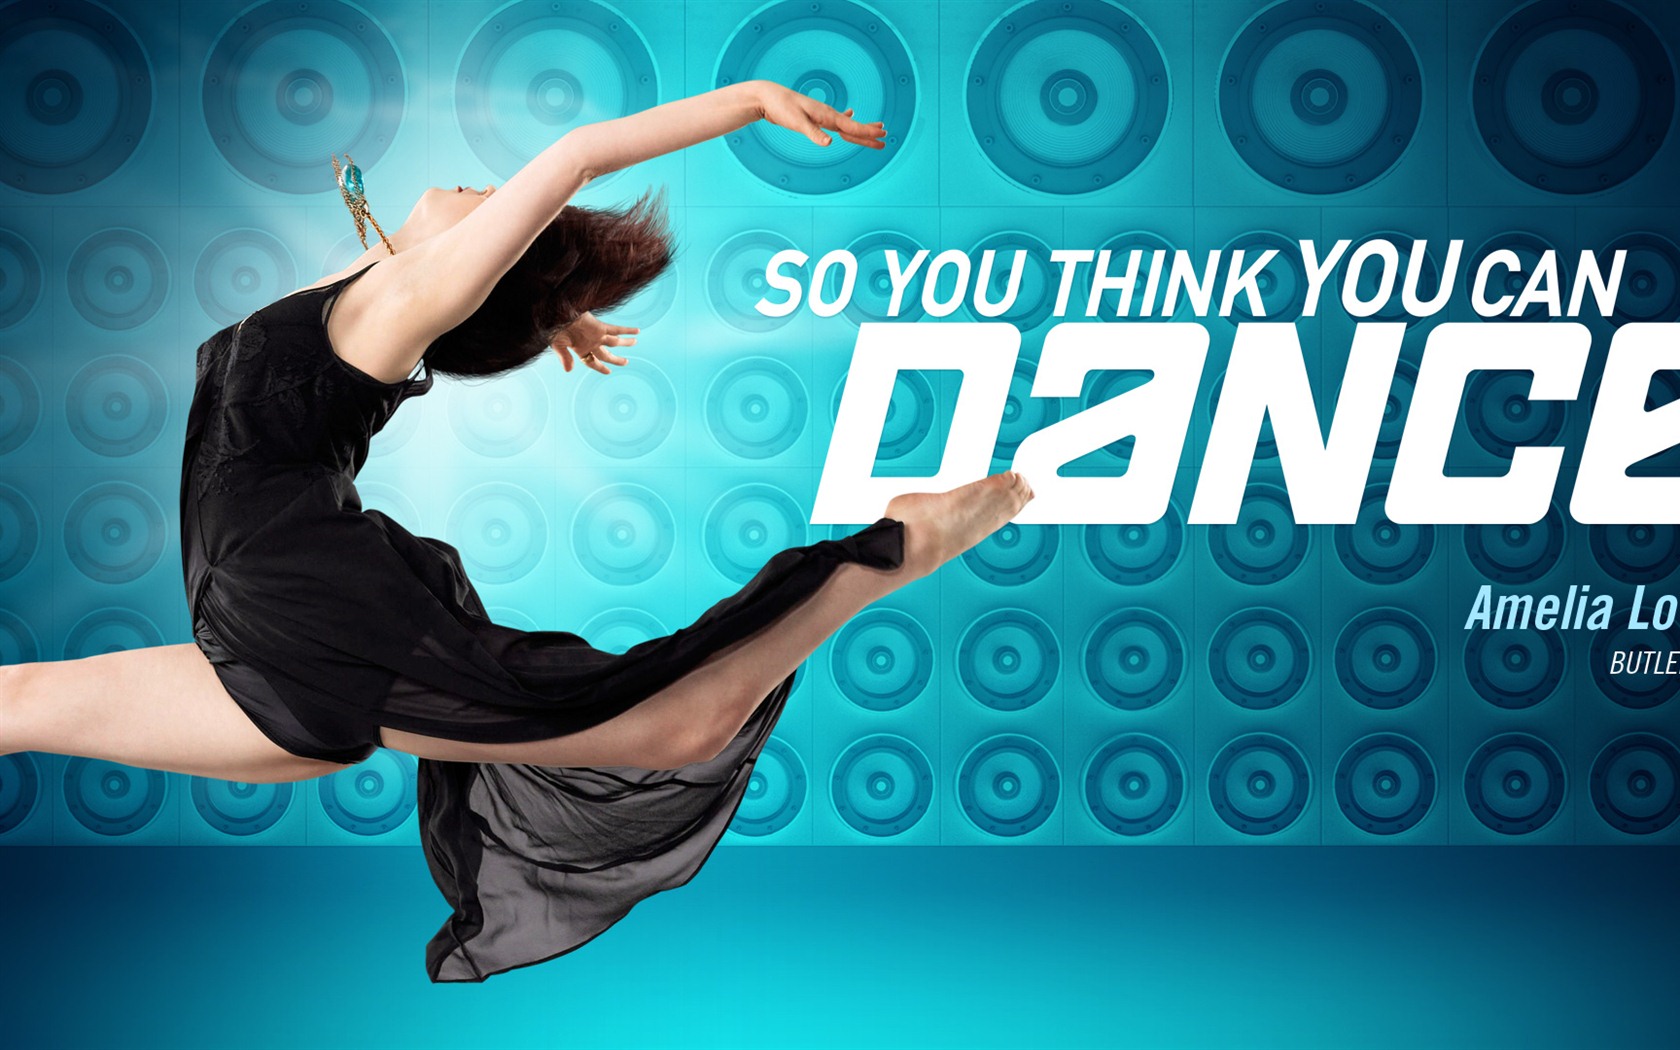 So You Think You Can Dance 舞林争霸 2012高清壁纸4 - 1680x1050